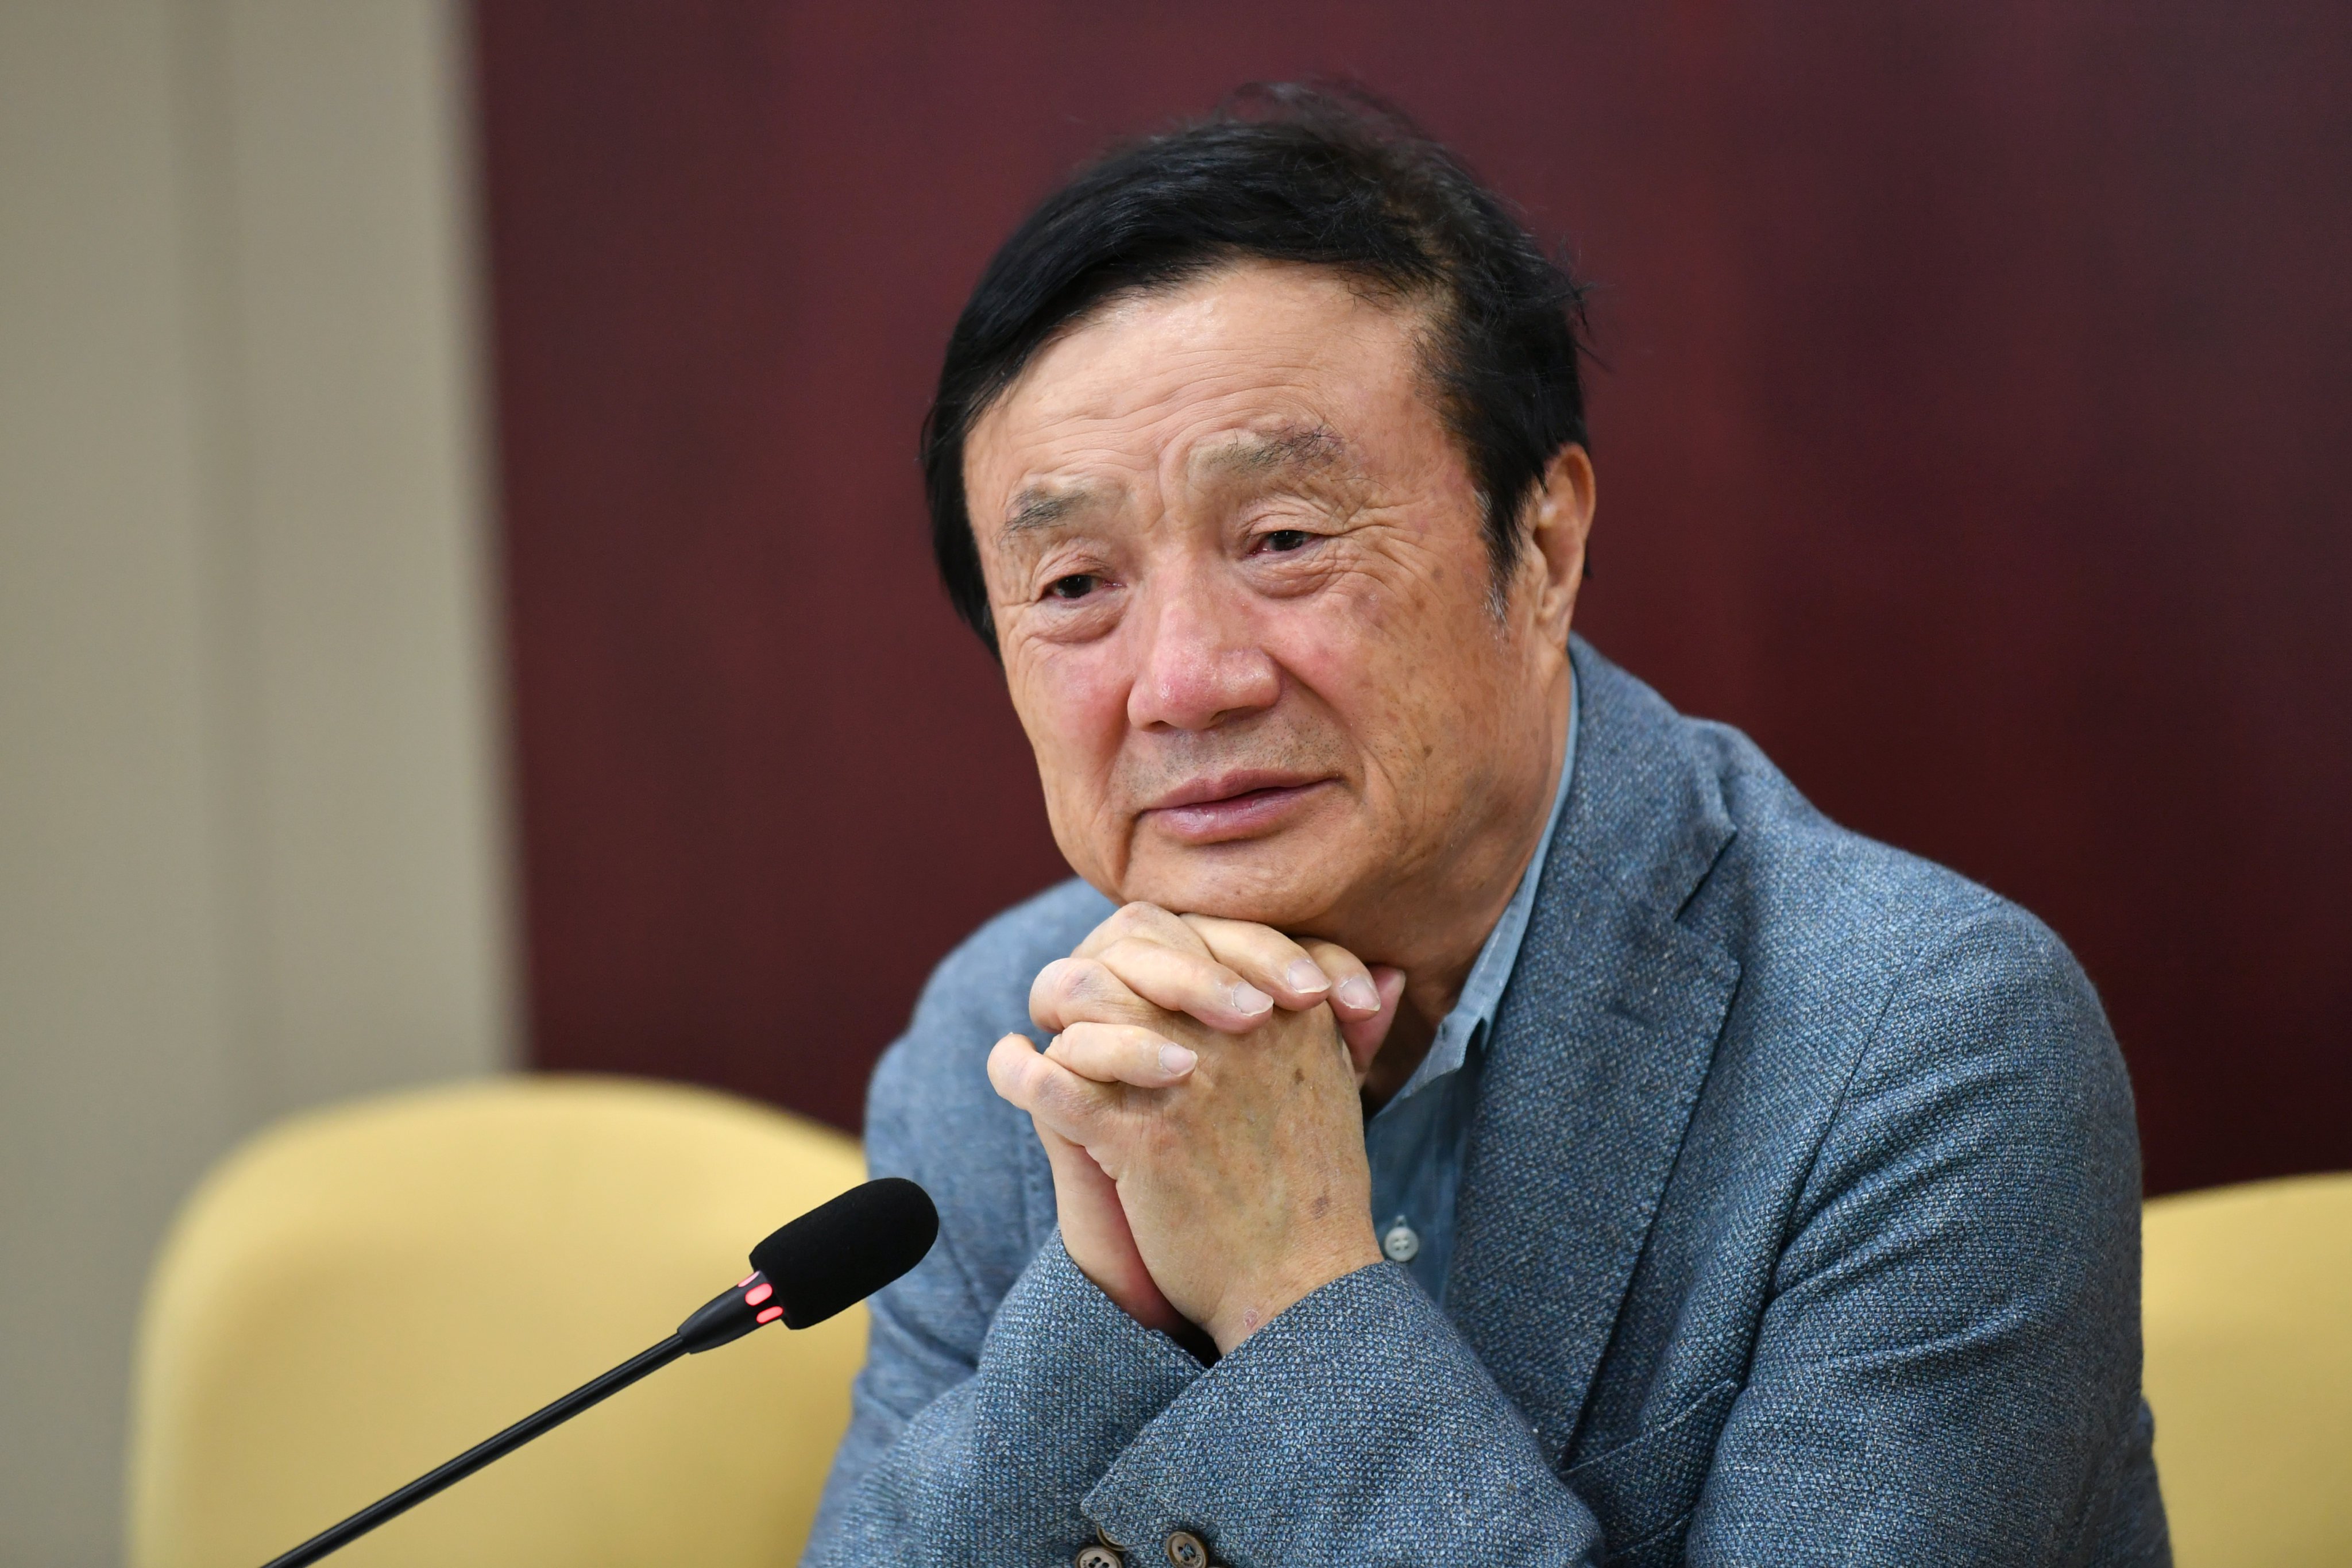 Huawei founder and CEO Ren Zhengfei is interviewed in Taiyuan, northern Shanxi province, on February 9, 2021. Photo: Xinhua